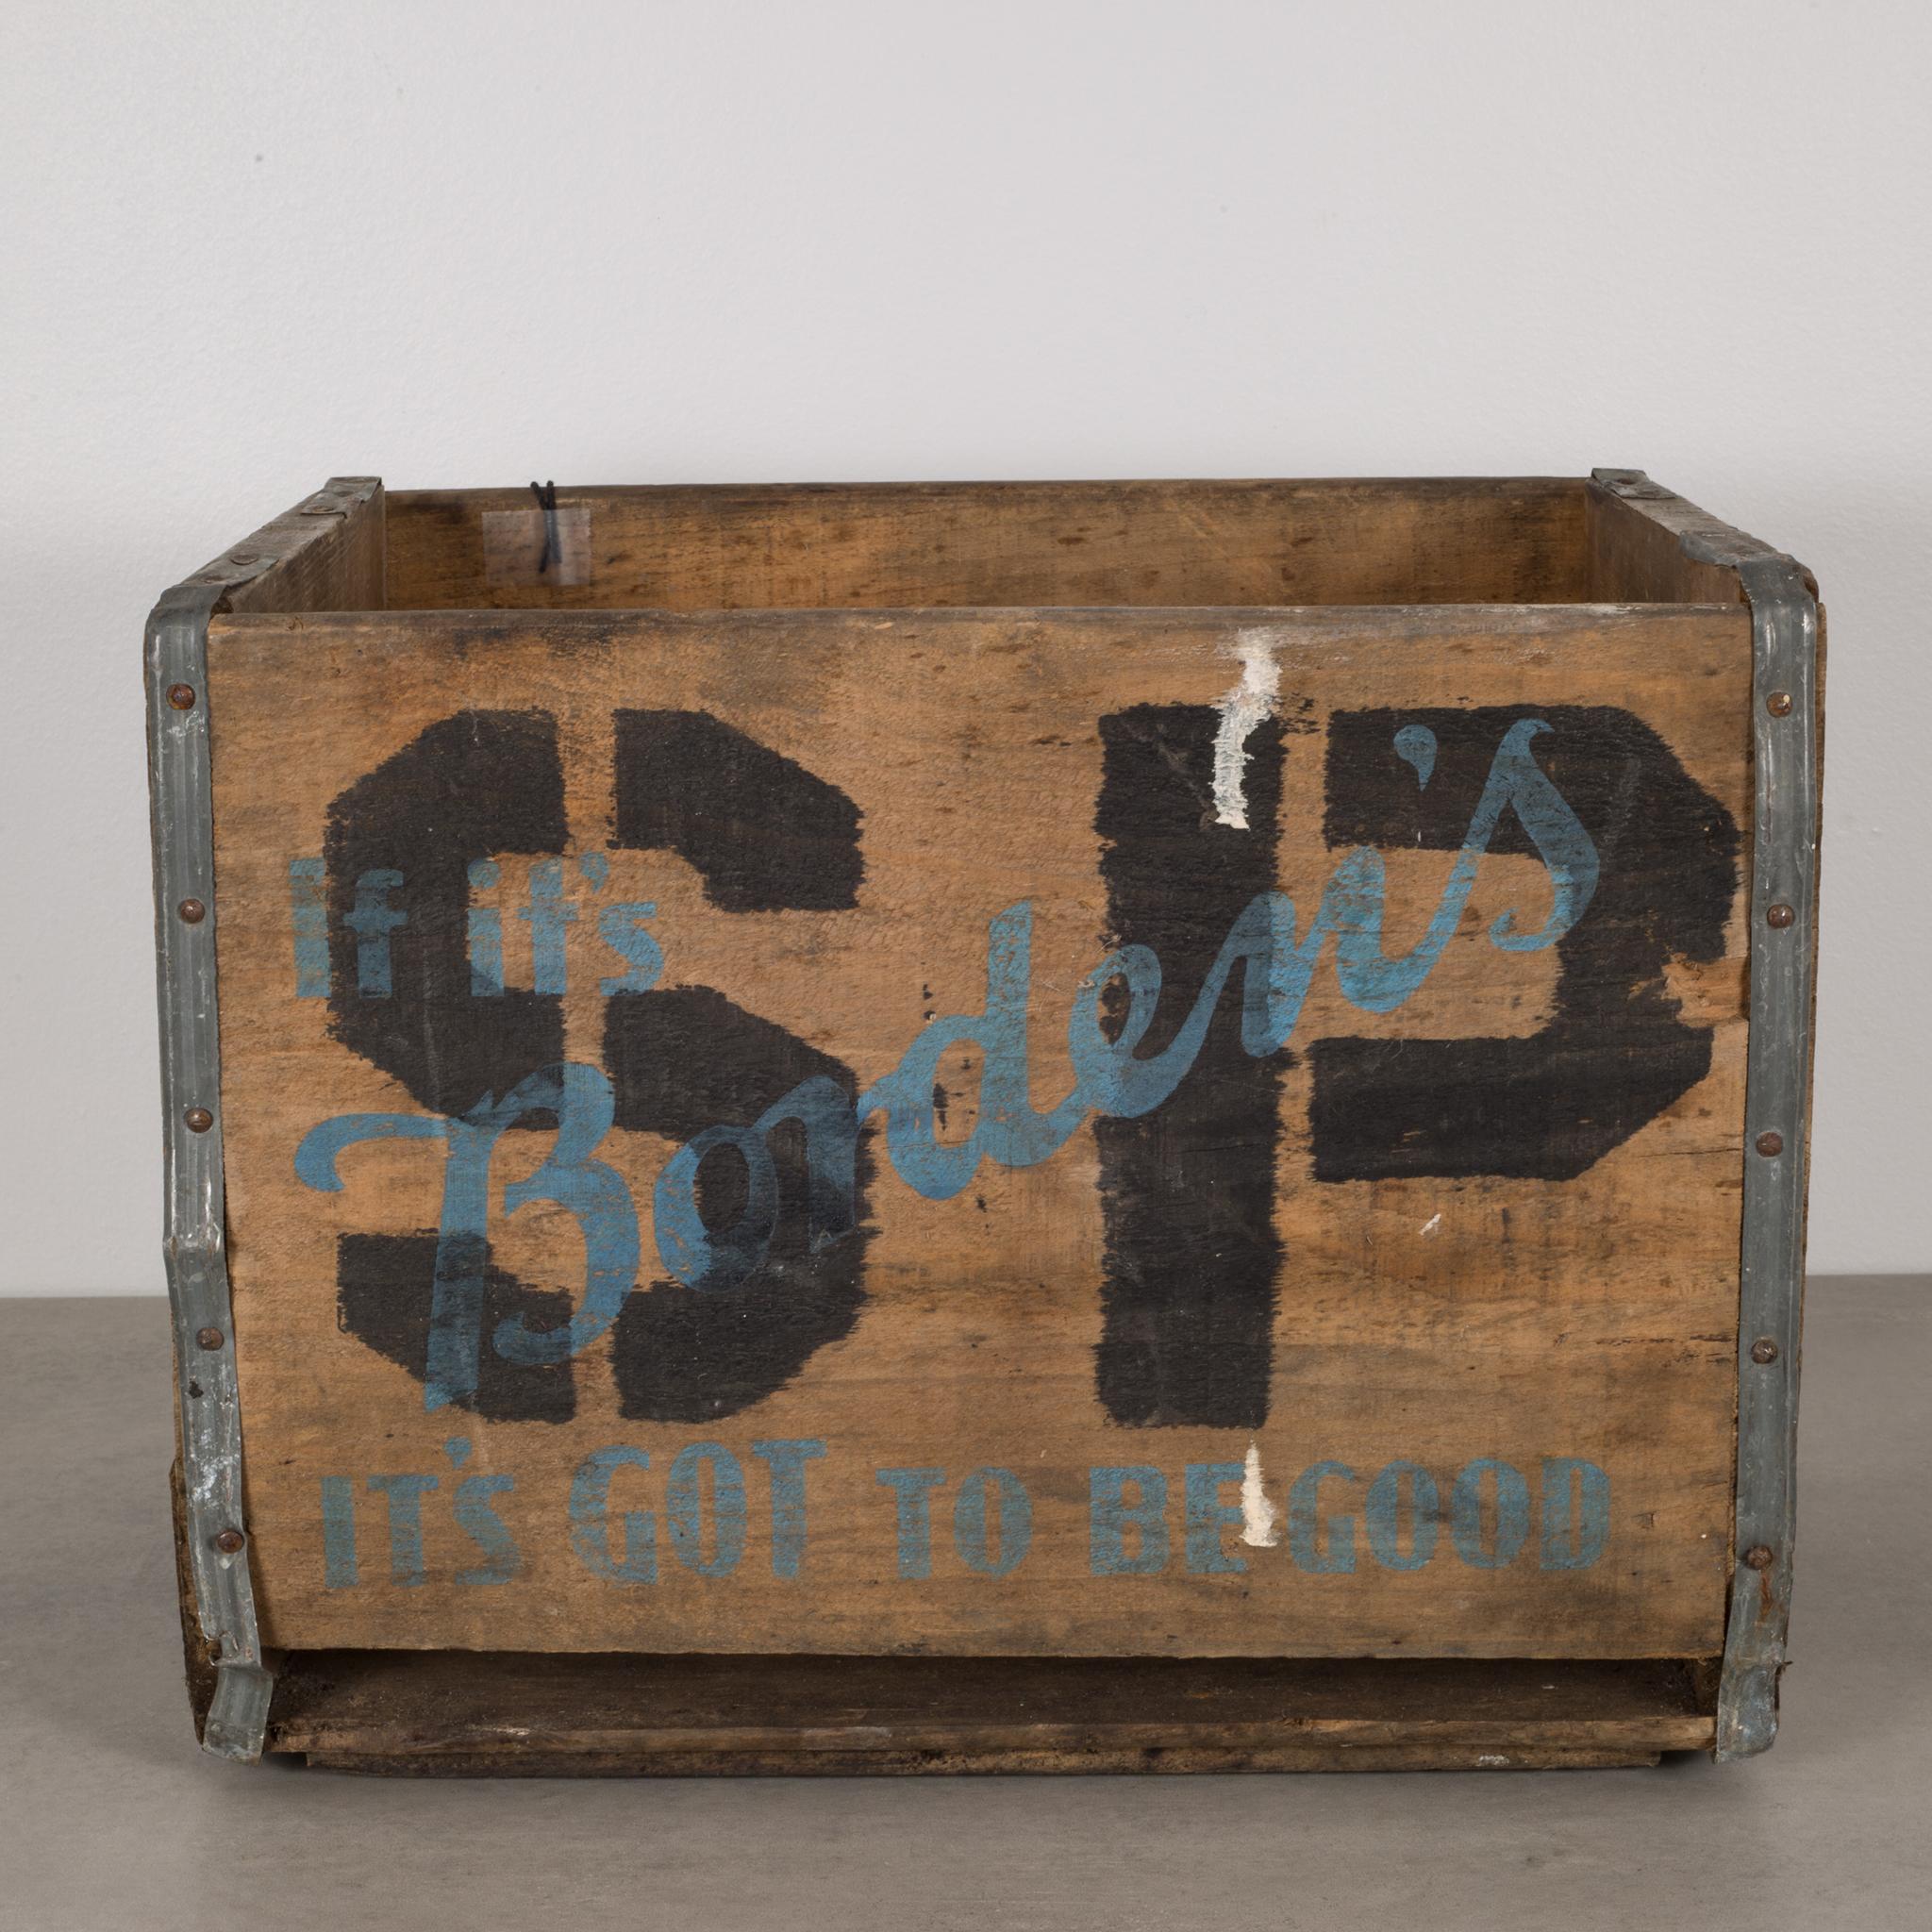 About

This is an original Bordon Dairy milk crate. The wooden crate has reinforcing metal straps on each corner and cutout handles. This is a smaller version of a traditional milk crate. 